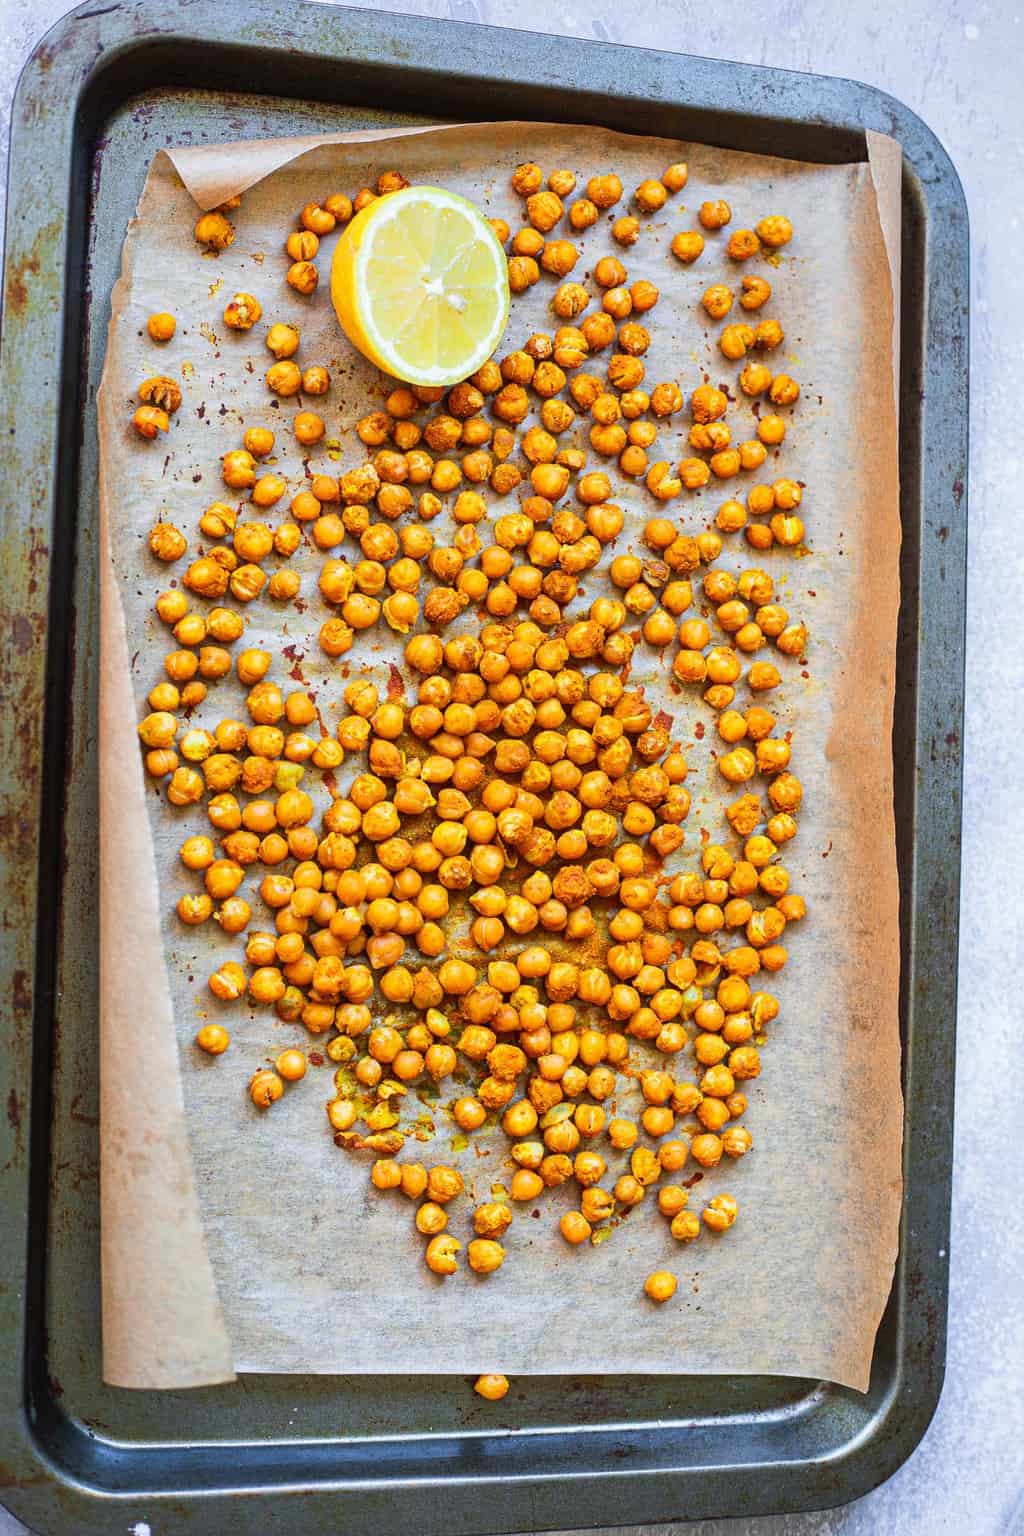 Roasted chickpeas on a baking tray